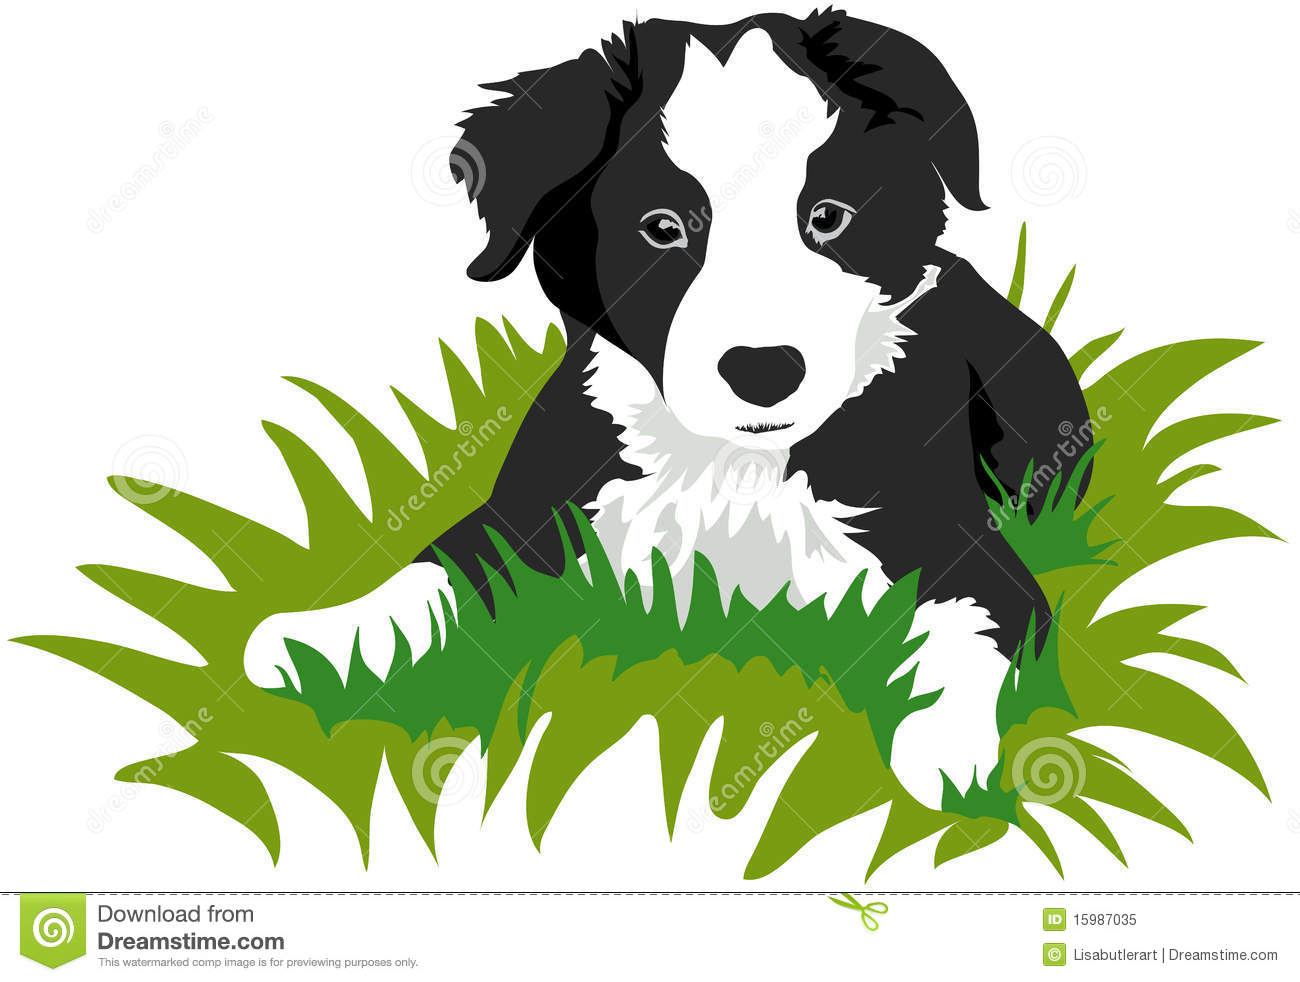 Border Collie clipart #11, Download drawings